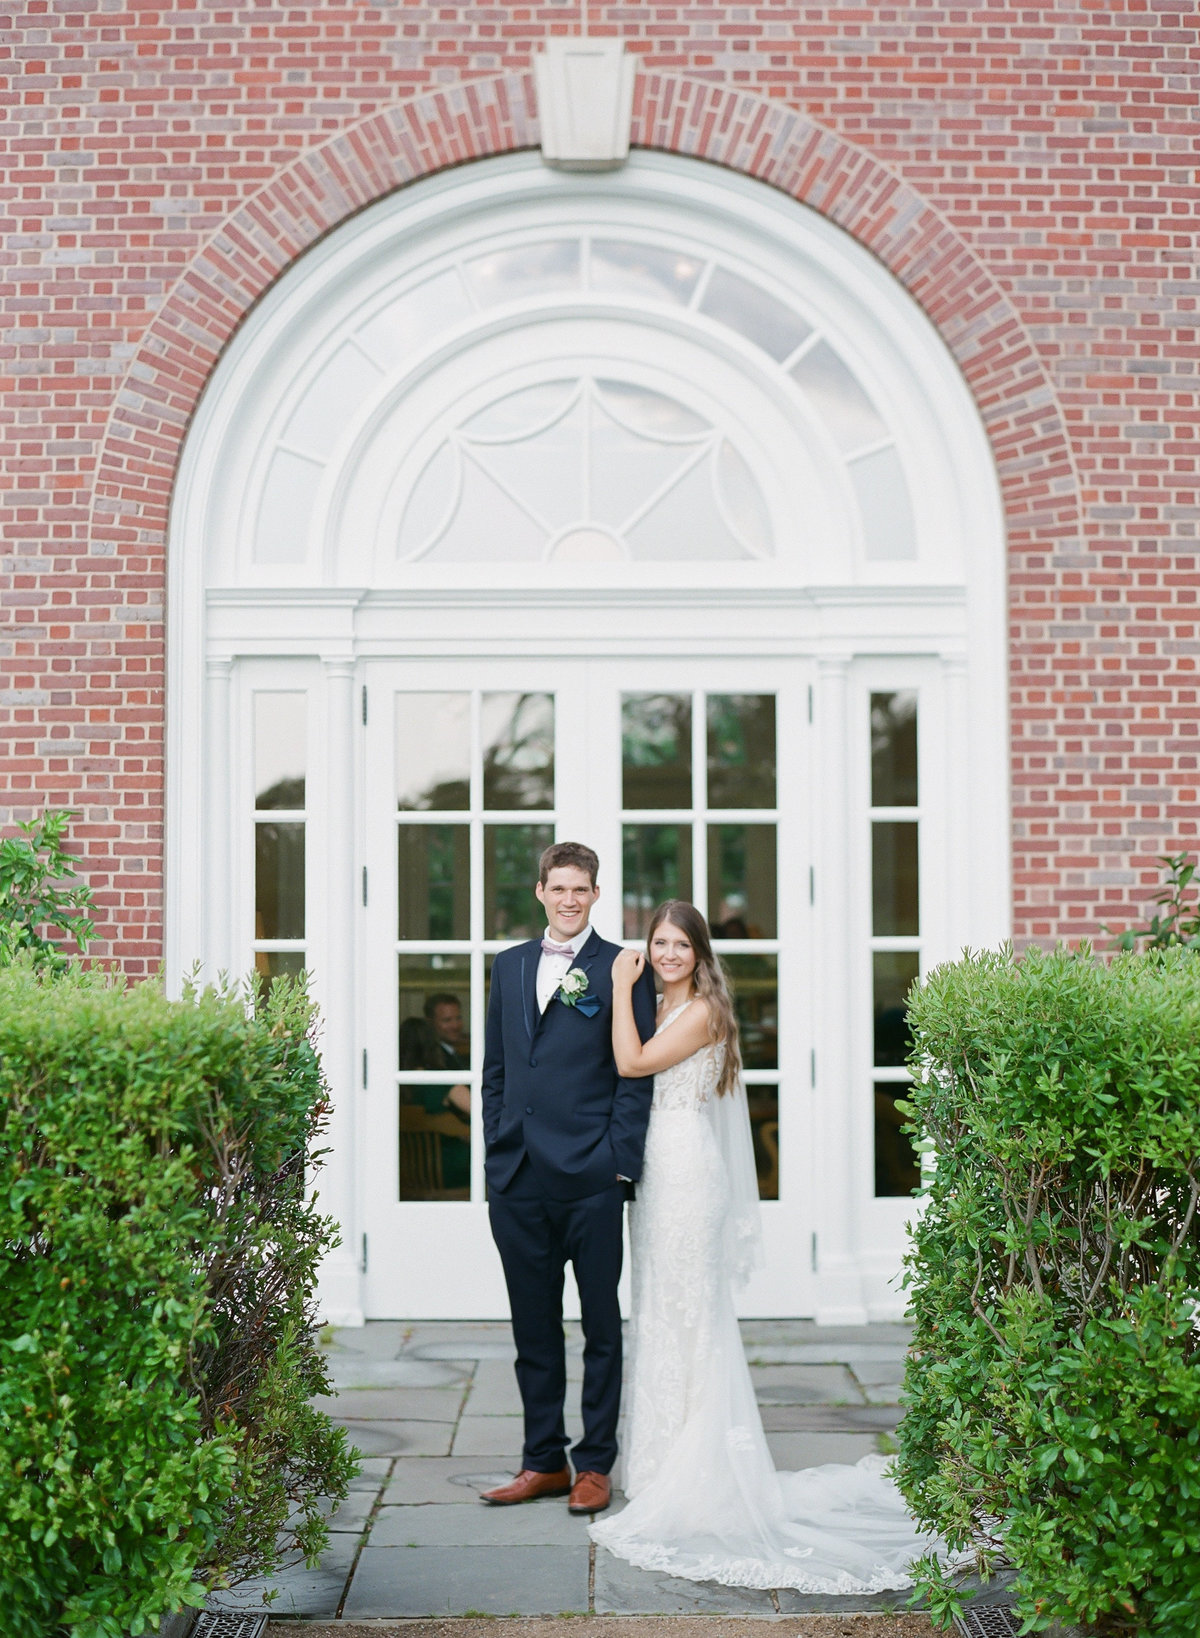 Jacqueline Anne Photography - Chrissy and David-127